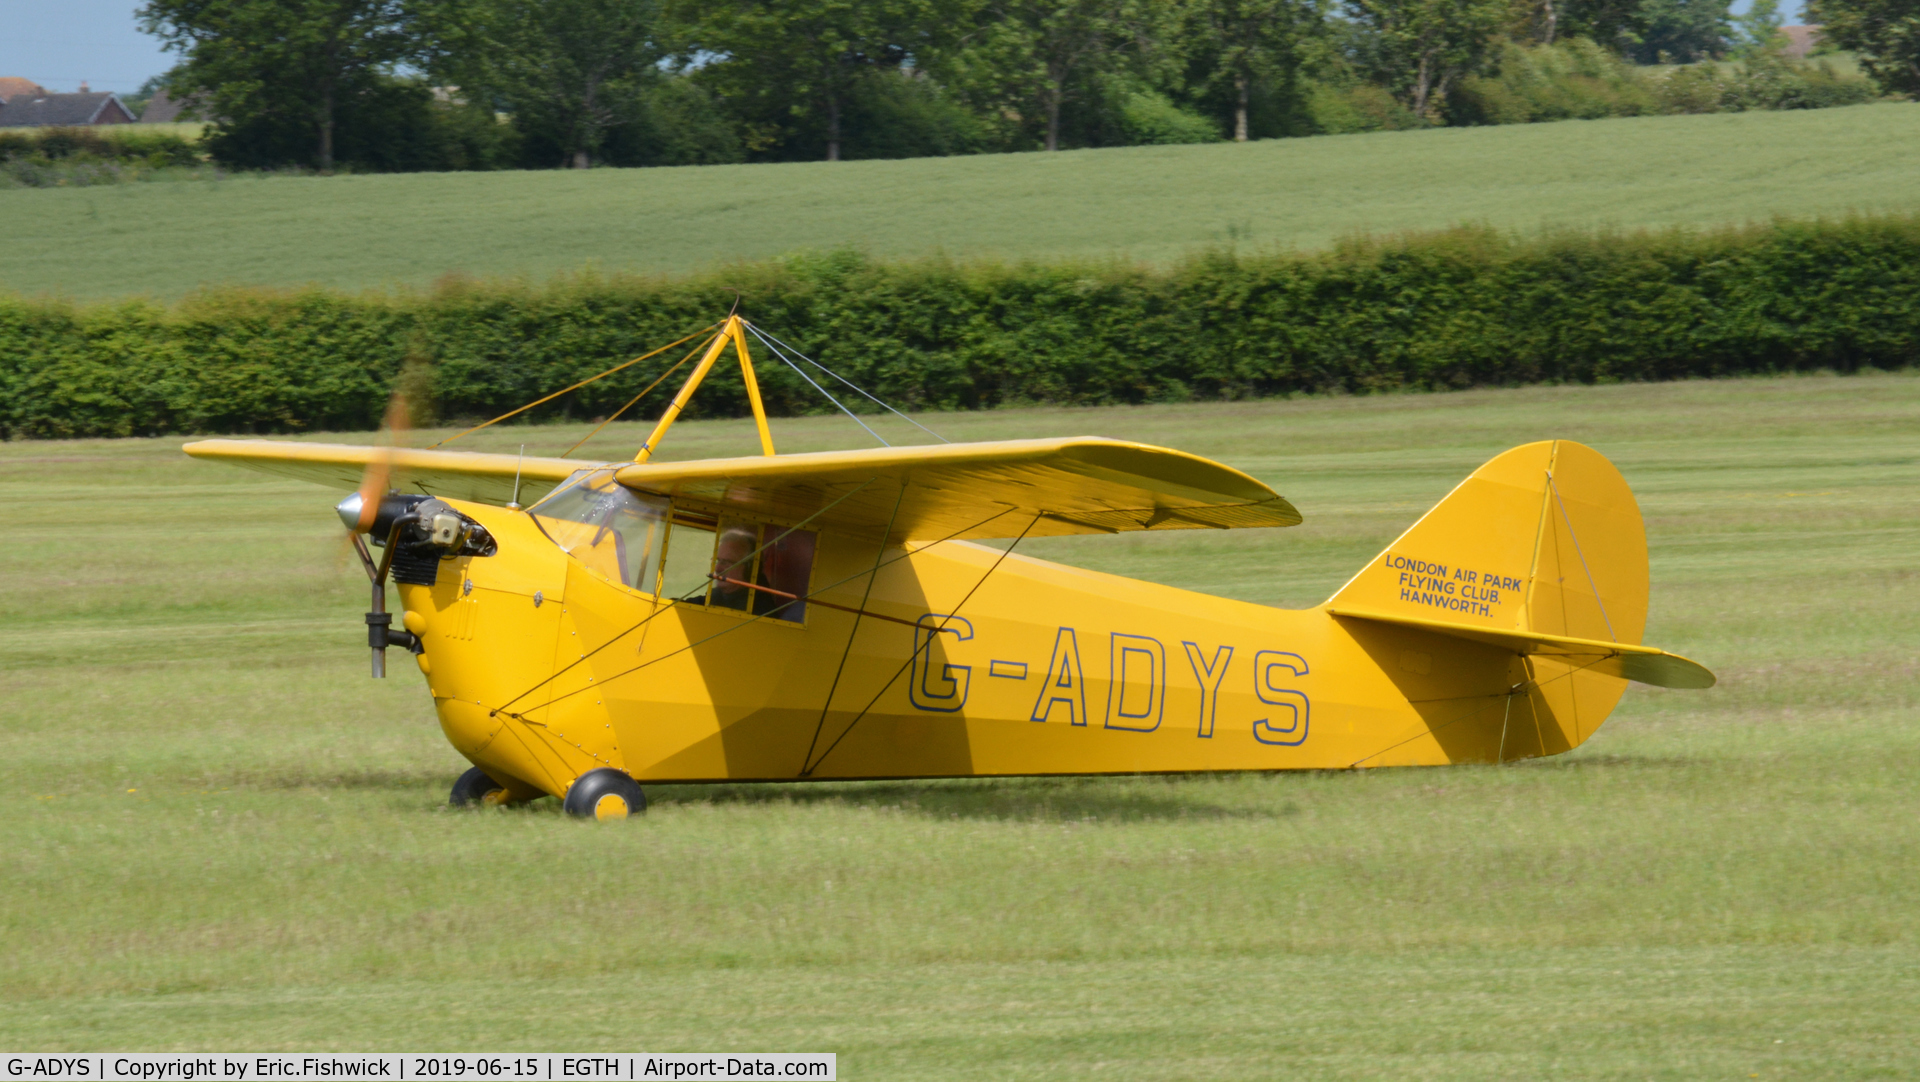 G-ADYS, 1935 Aeronca C-3 C/N A-600, 1. G-ADYS at The Evening Airshow at The Shuttleworth Collection, June, 2019.